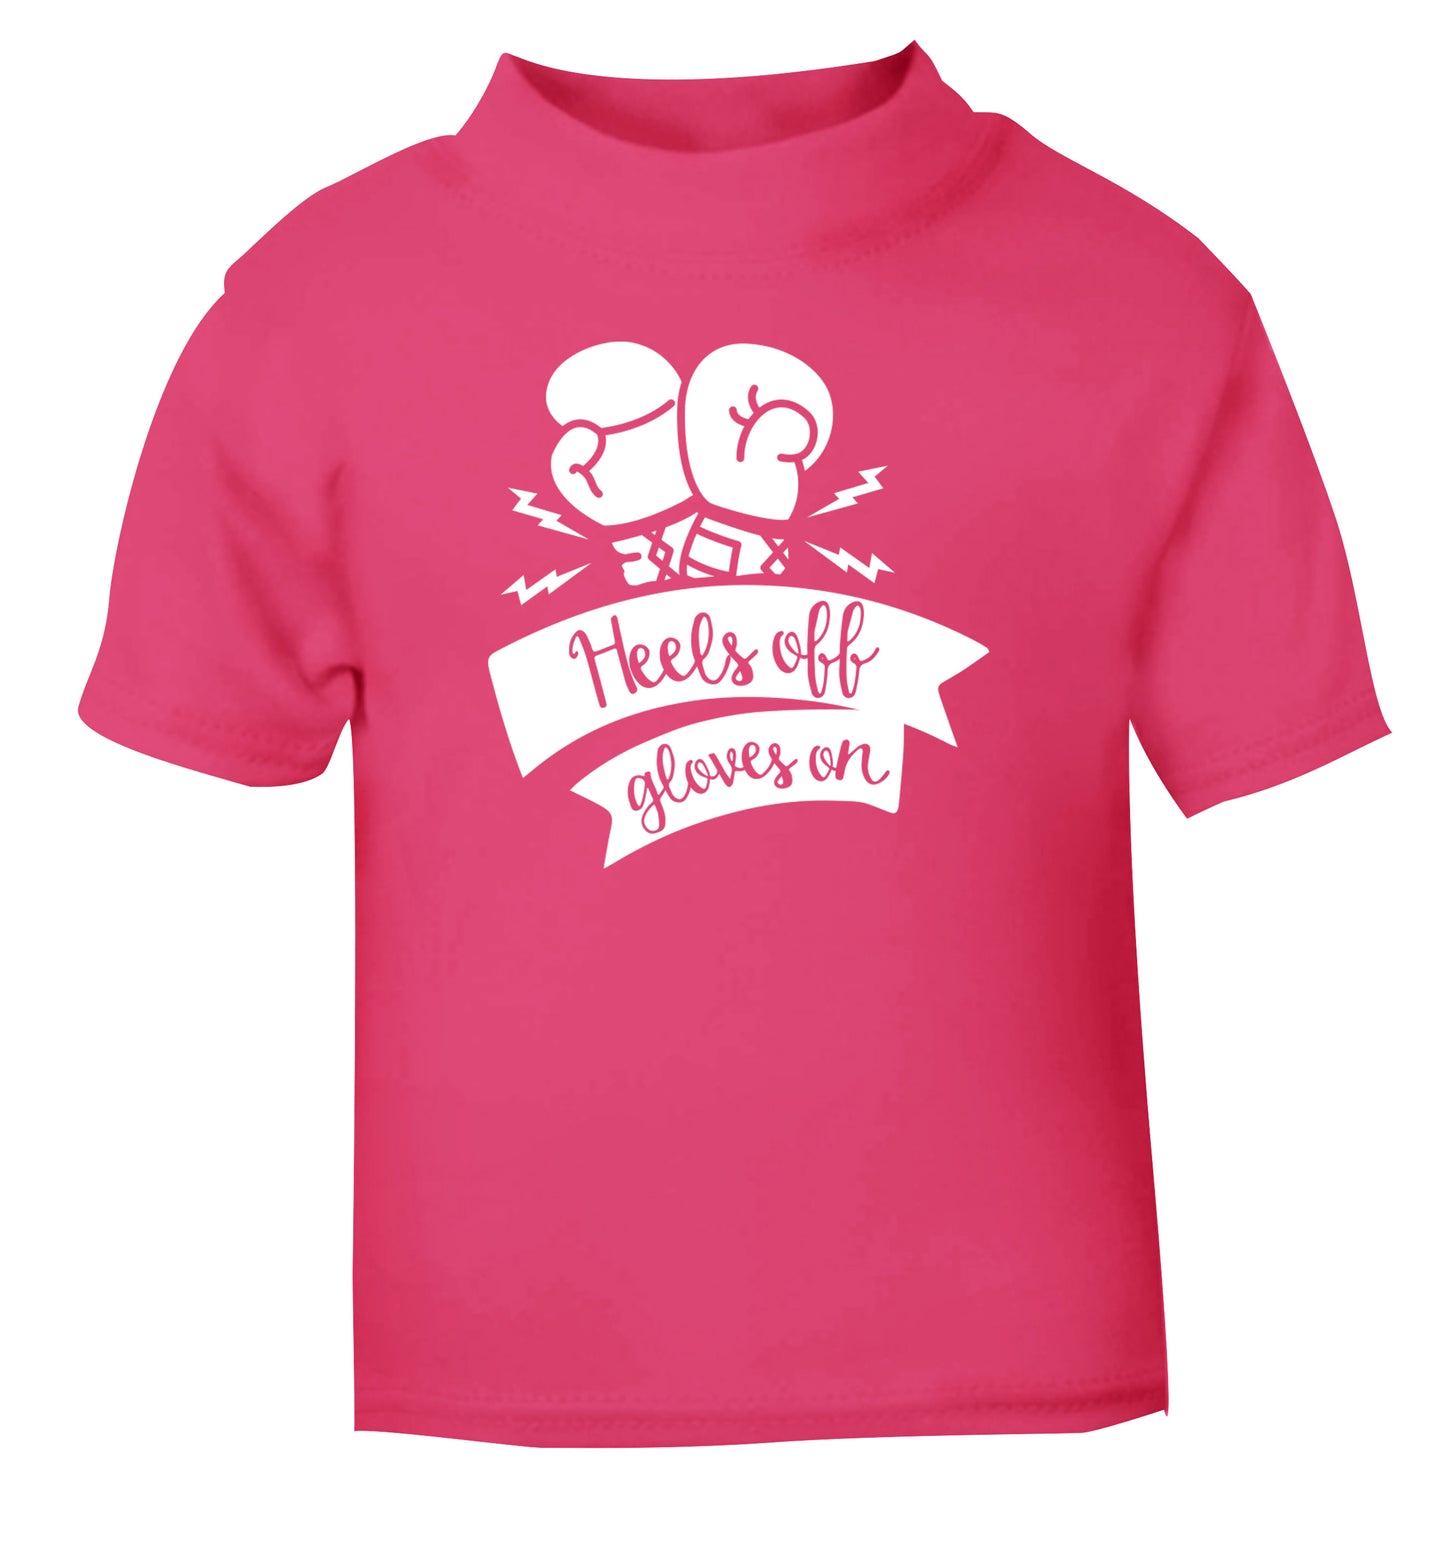 Heels off gloves on pink Baby Toddler Tshirt 2 Years